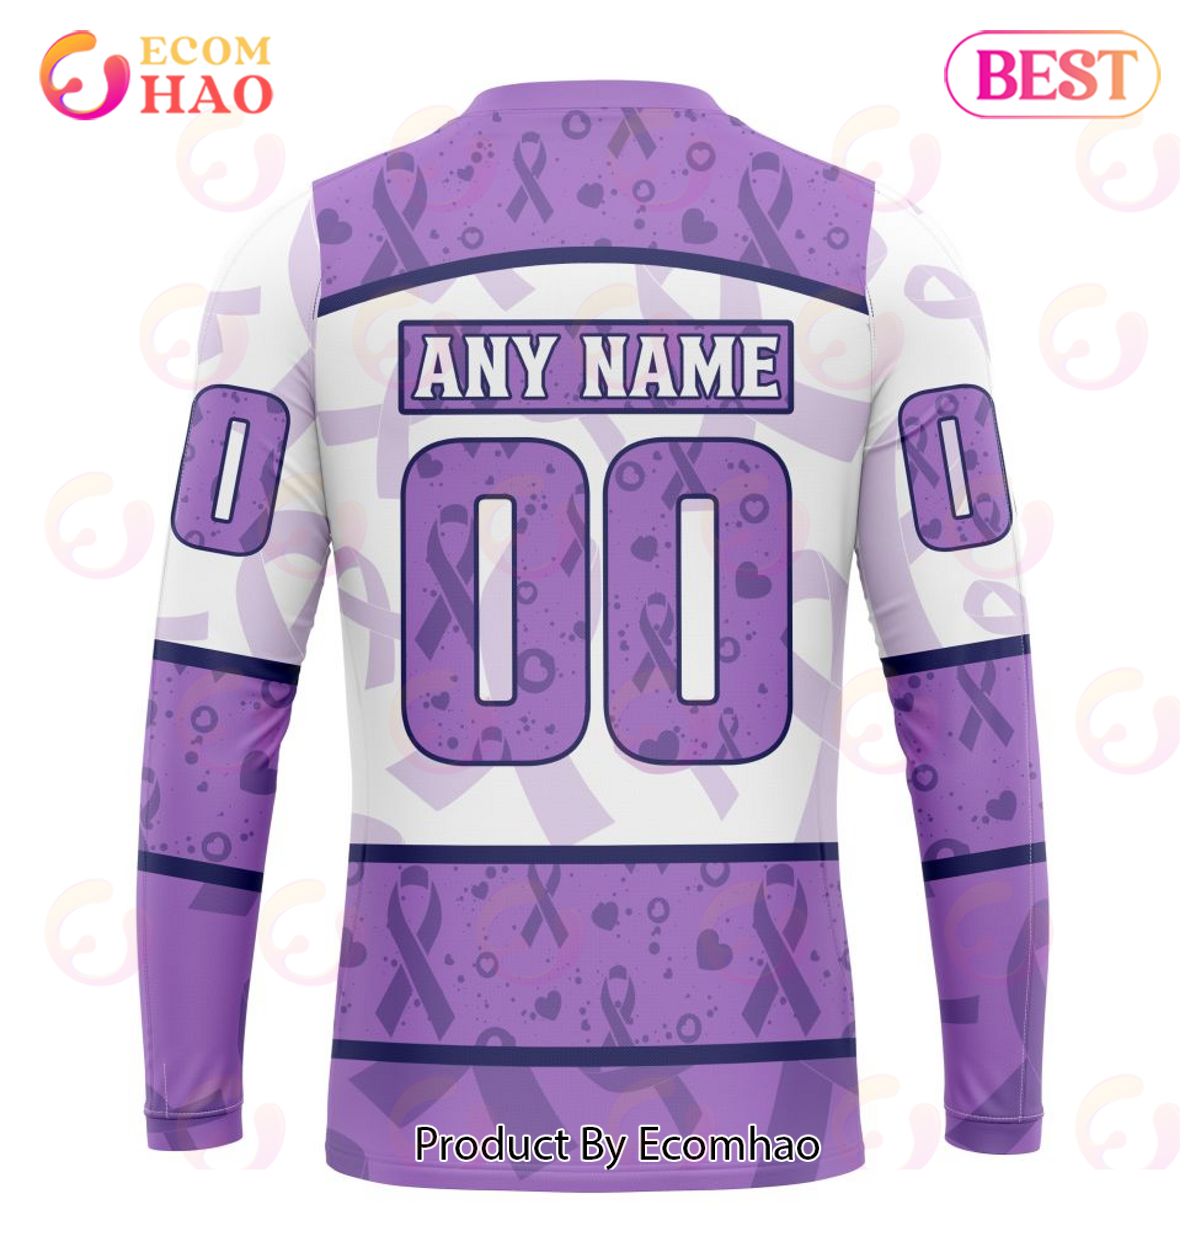 OHL Flint Firebirds Special Lavender Fight Cancer 3D Hoodie